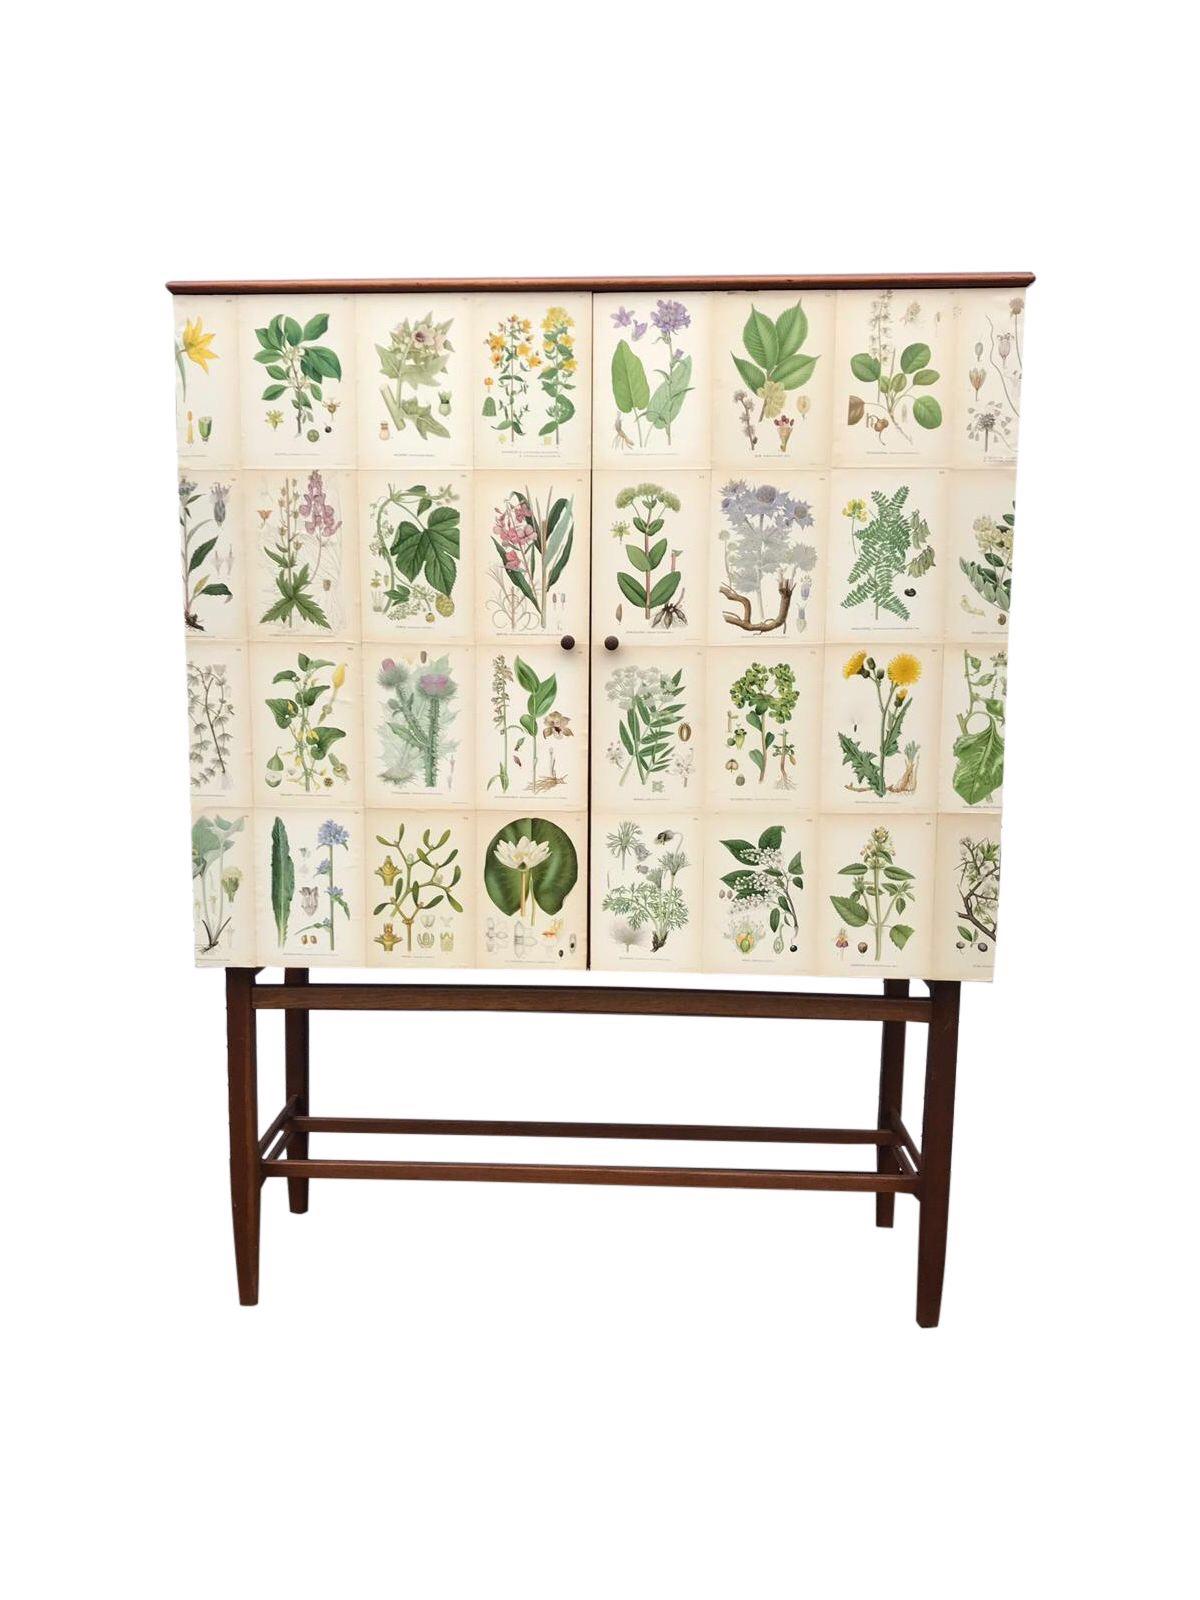 This fabulous Swedish vintage cabinet from the 1950s by famous maker FM Furniture, Linköping, 1950-1960. This piece has been restyled in our studio and covered in these amazing lithograph prints taken from C.A.M Lindman, Nordens Flora from 1926 then